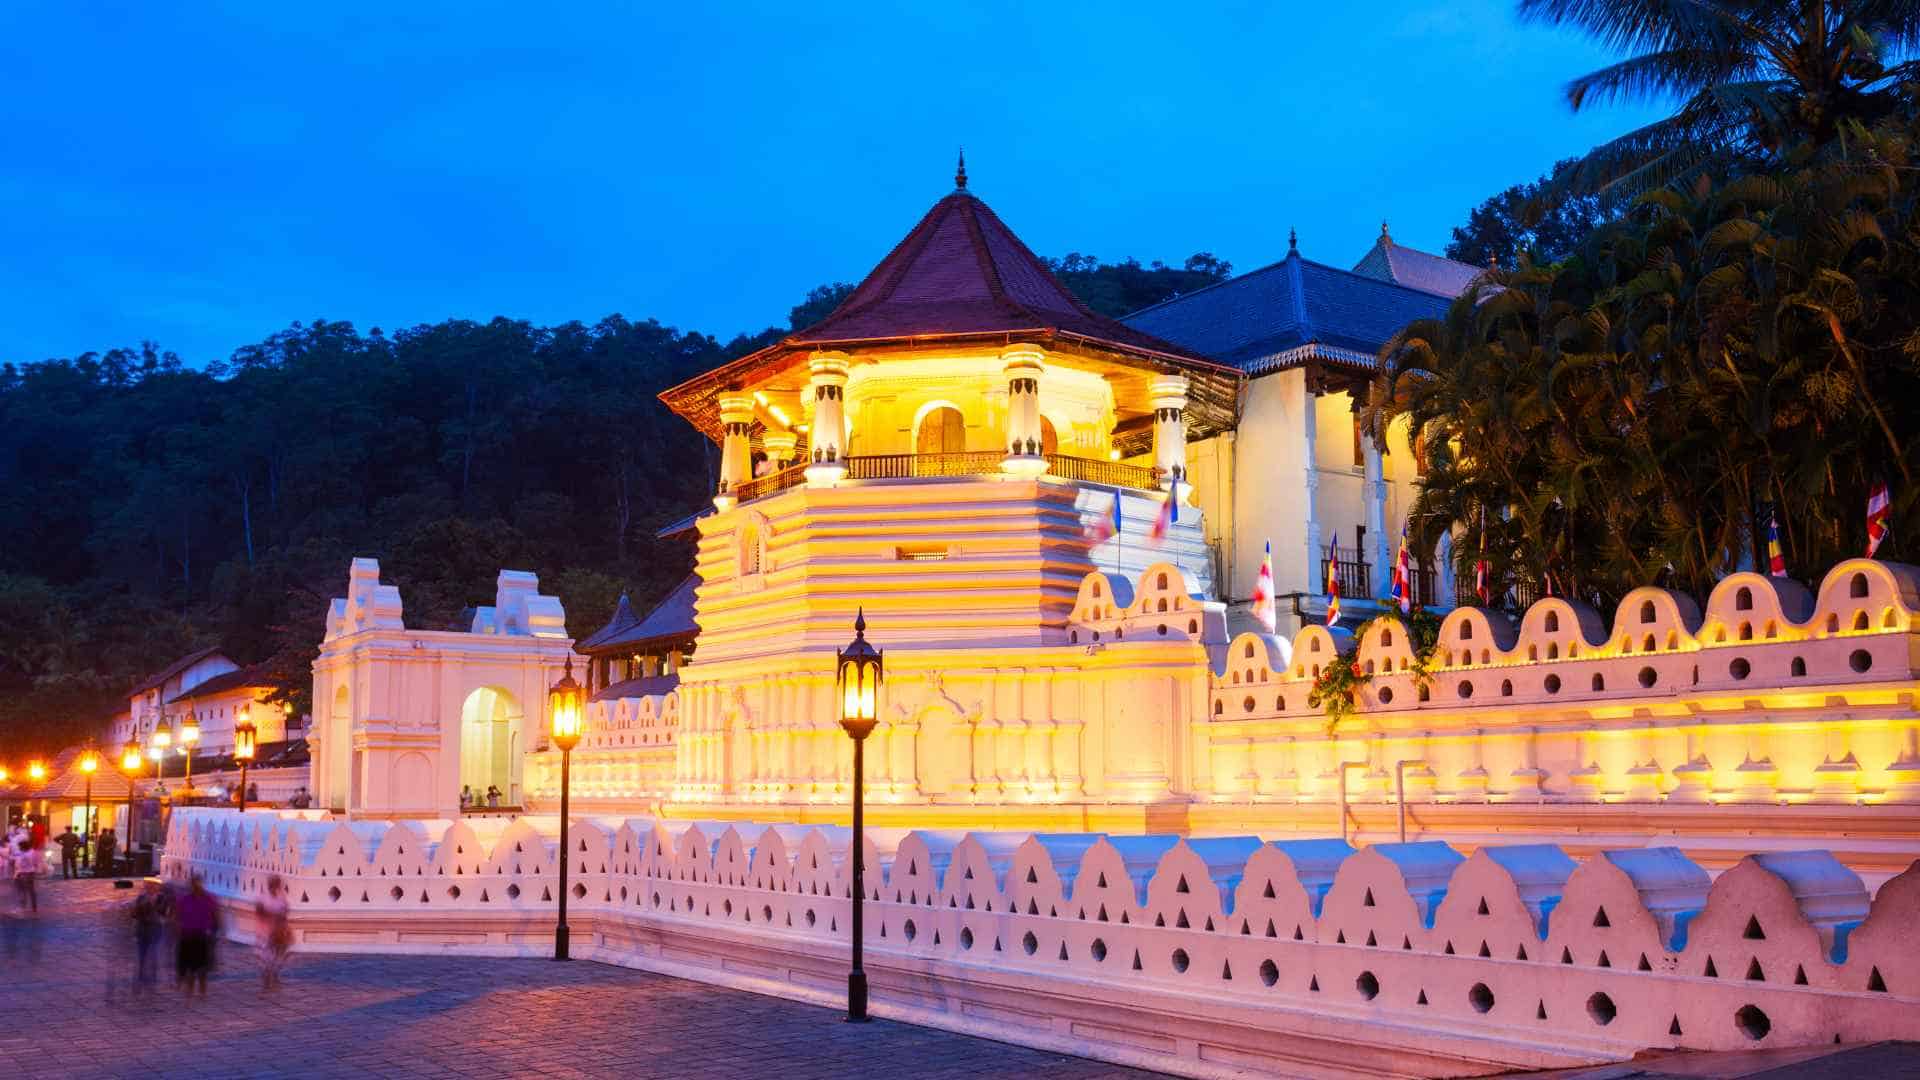 Temple of the Tooth Relic in kandy